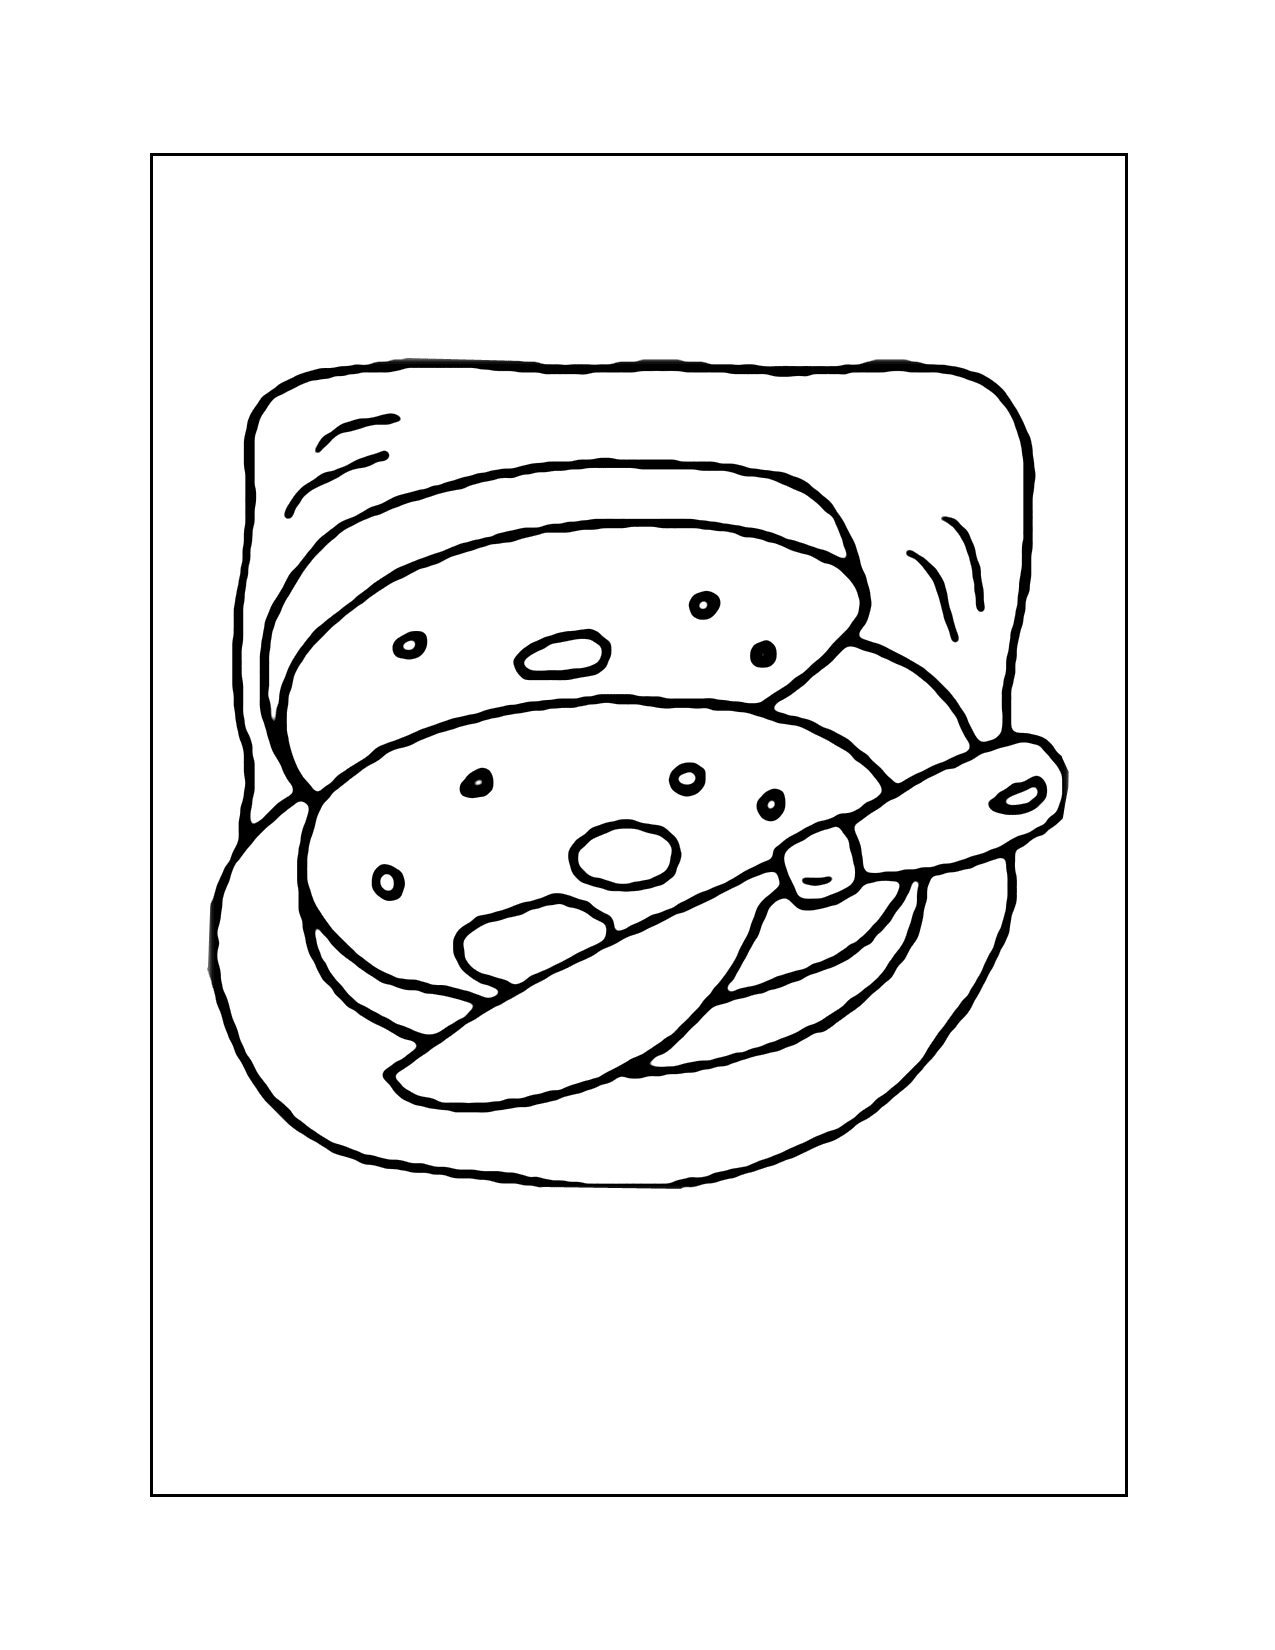 Bagel On A Plate Coloring Page